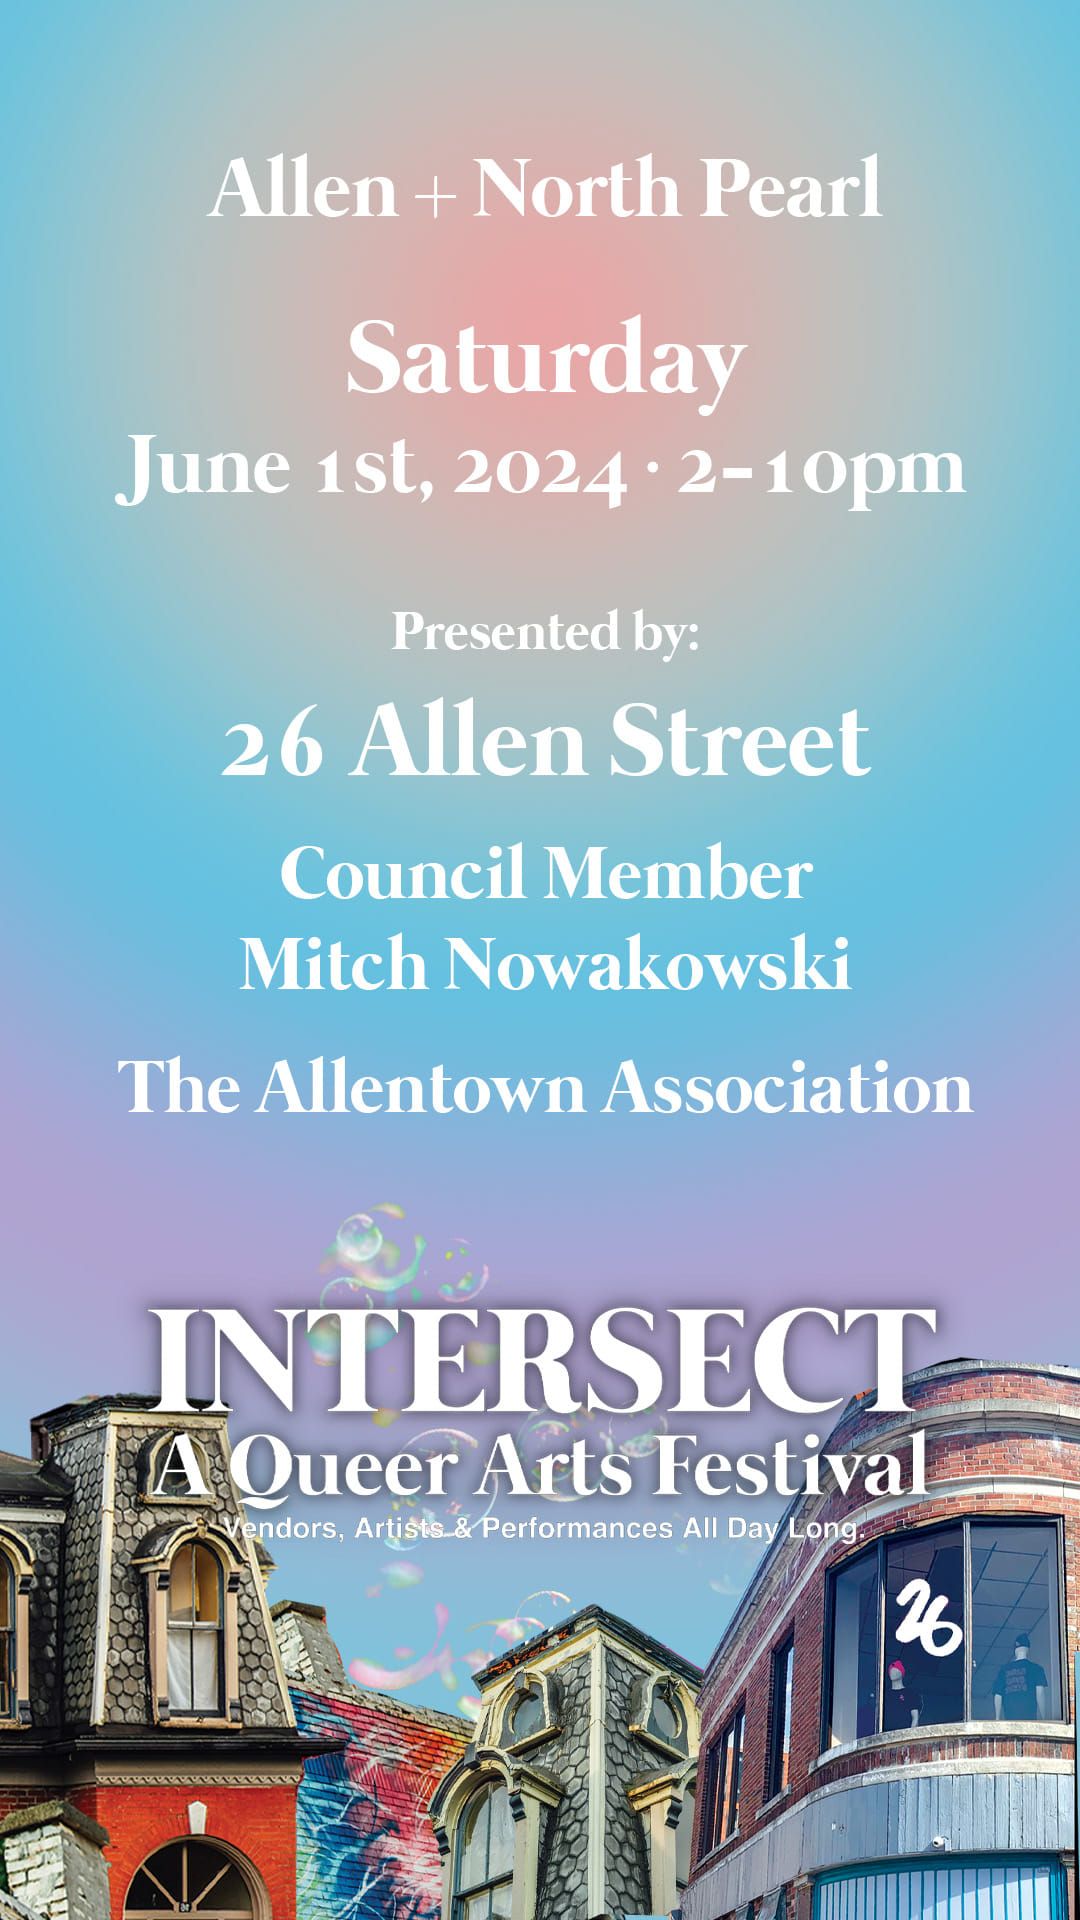 Intersect A Queer Arts Festival